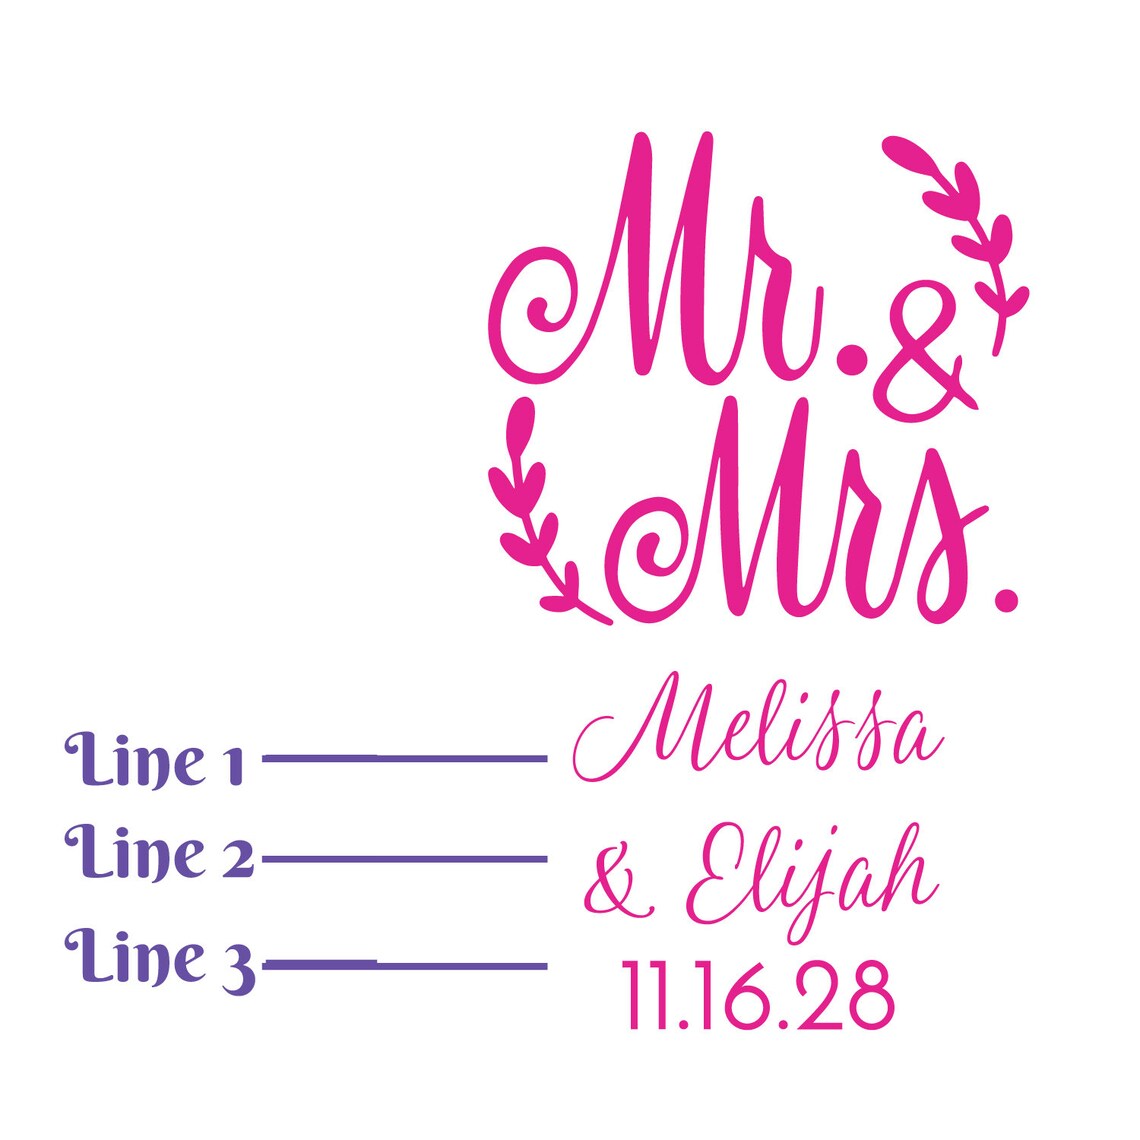 Mr. & Mrs. Wedding Party Personalized Stemless Wine Glass Favors (Set of 24)